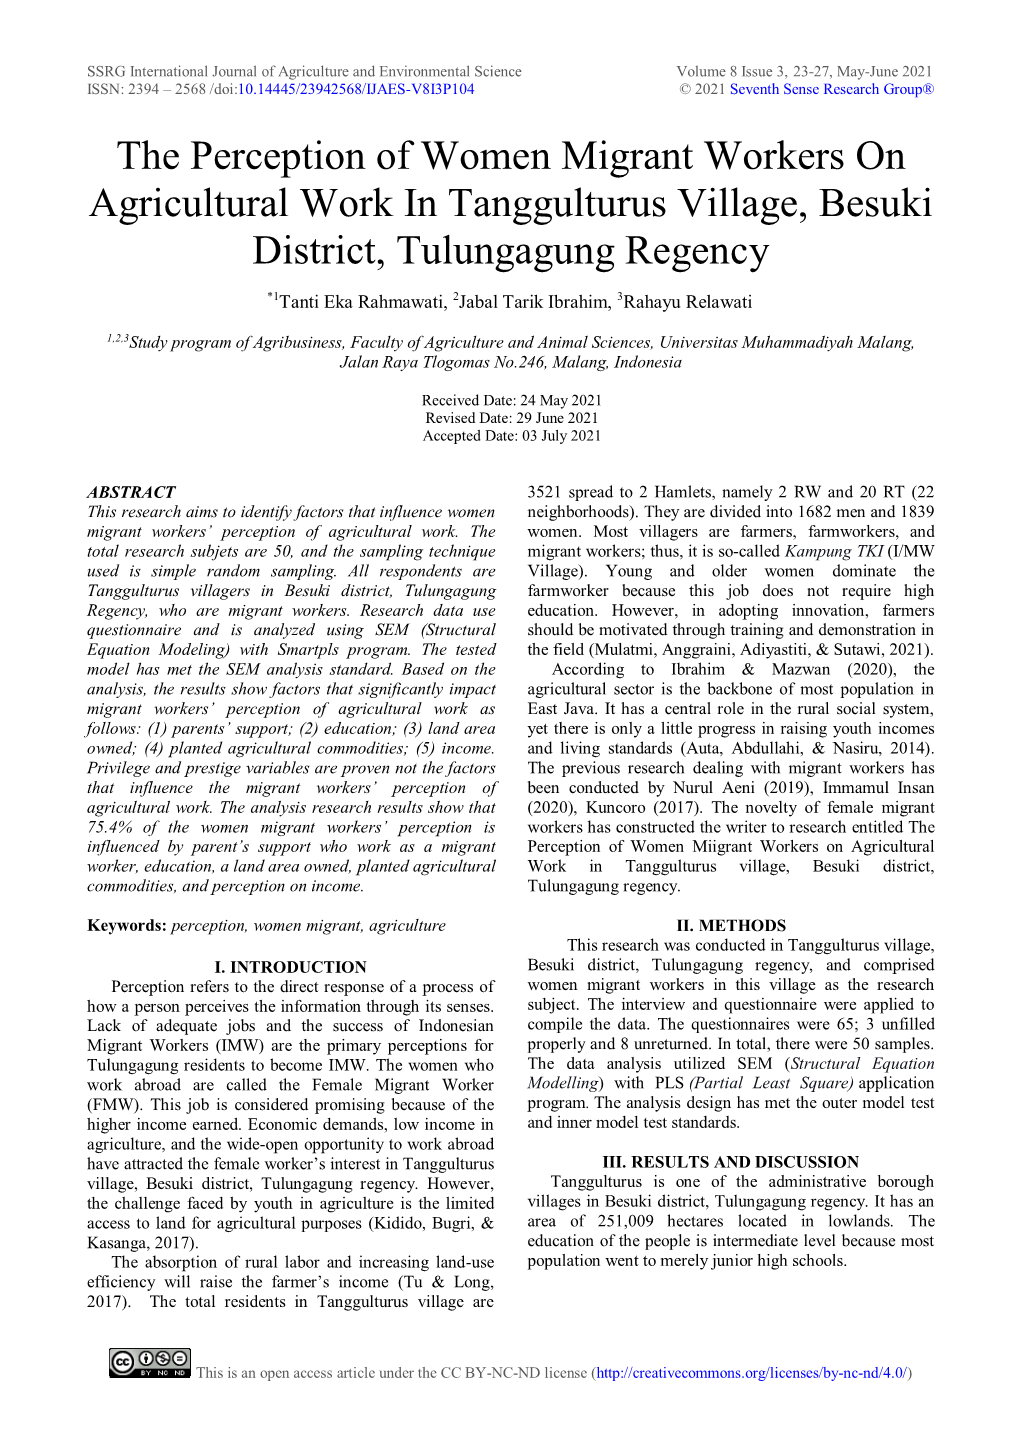 The Perception of Women Migrant Workers on Agricultural Work in Tanggulturus Village, Besuki District, Tulungagung Regency